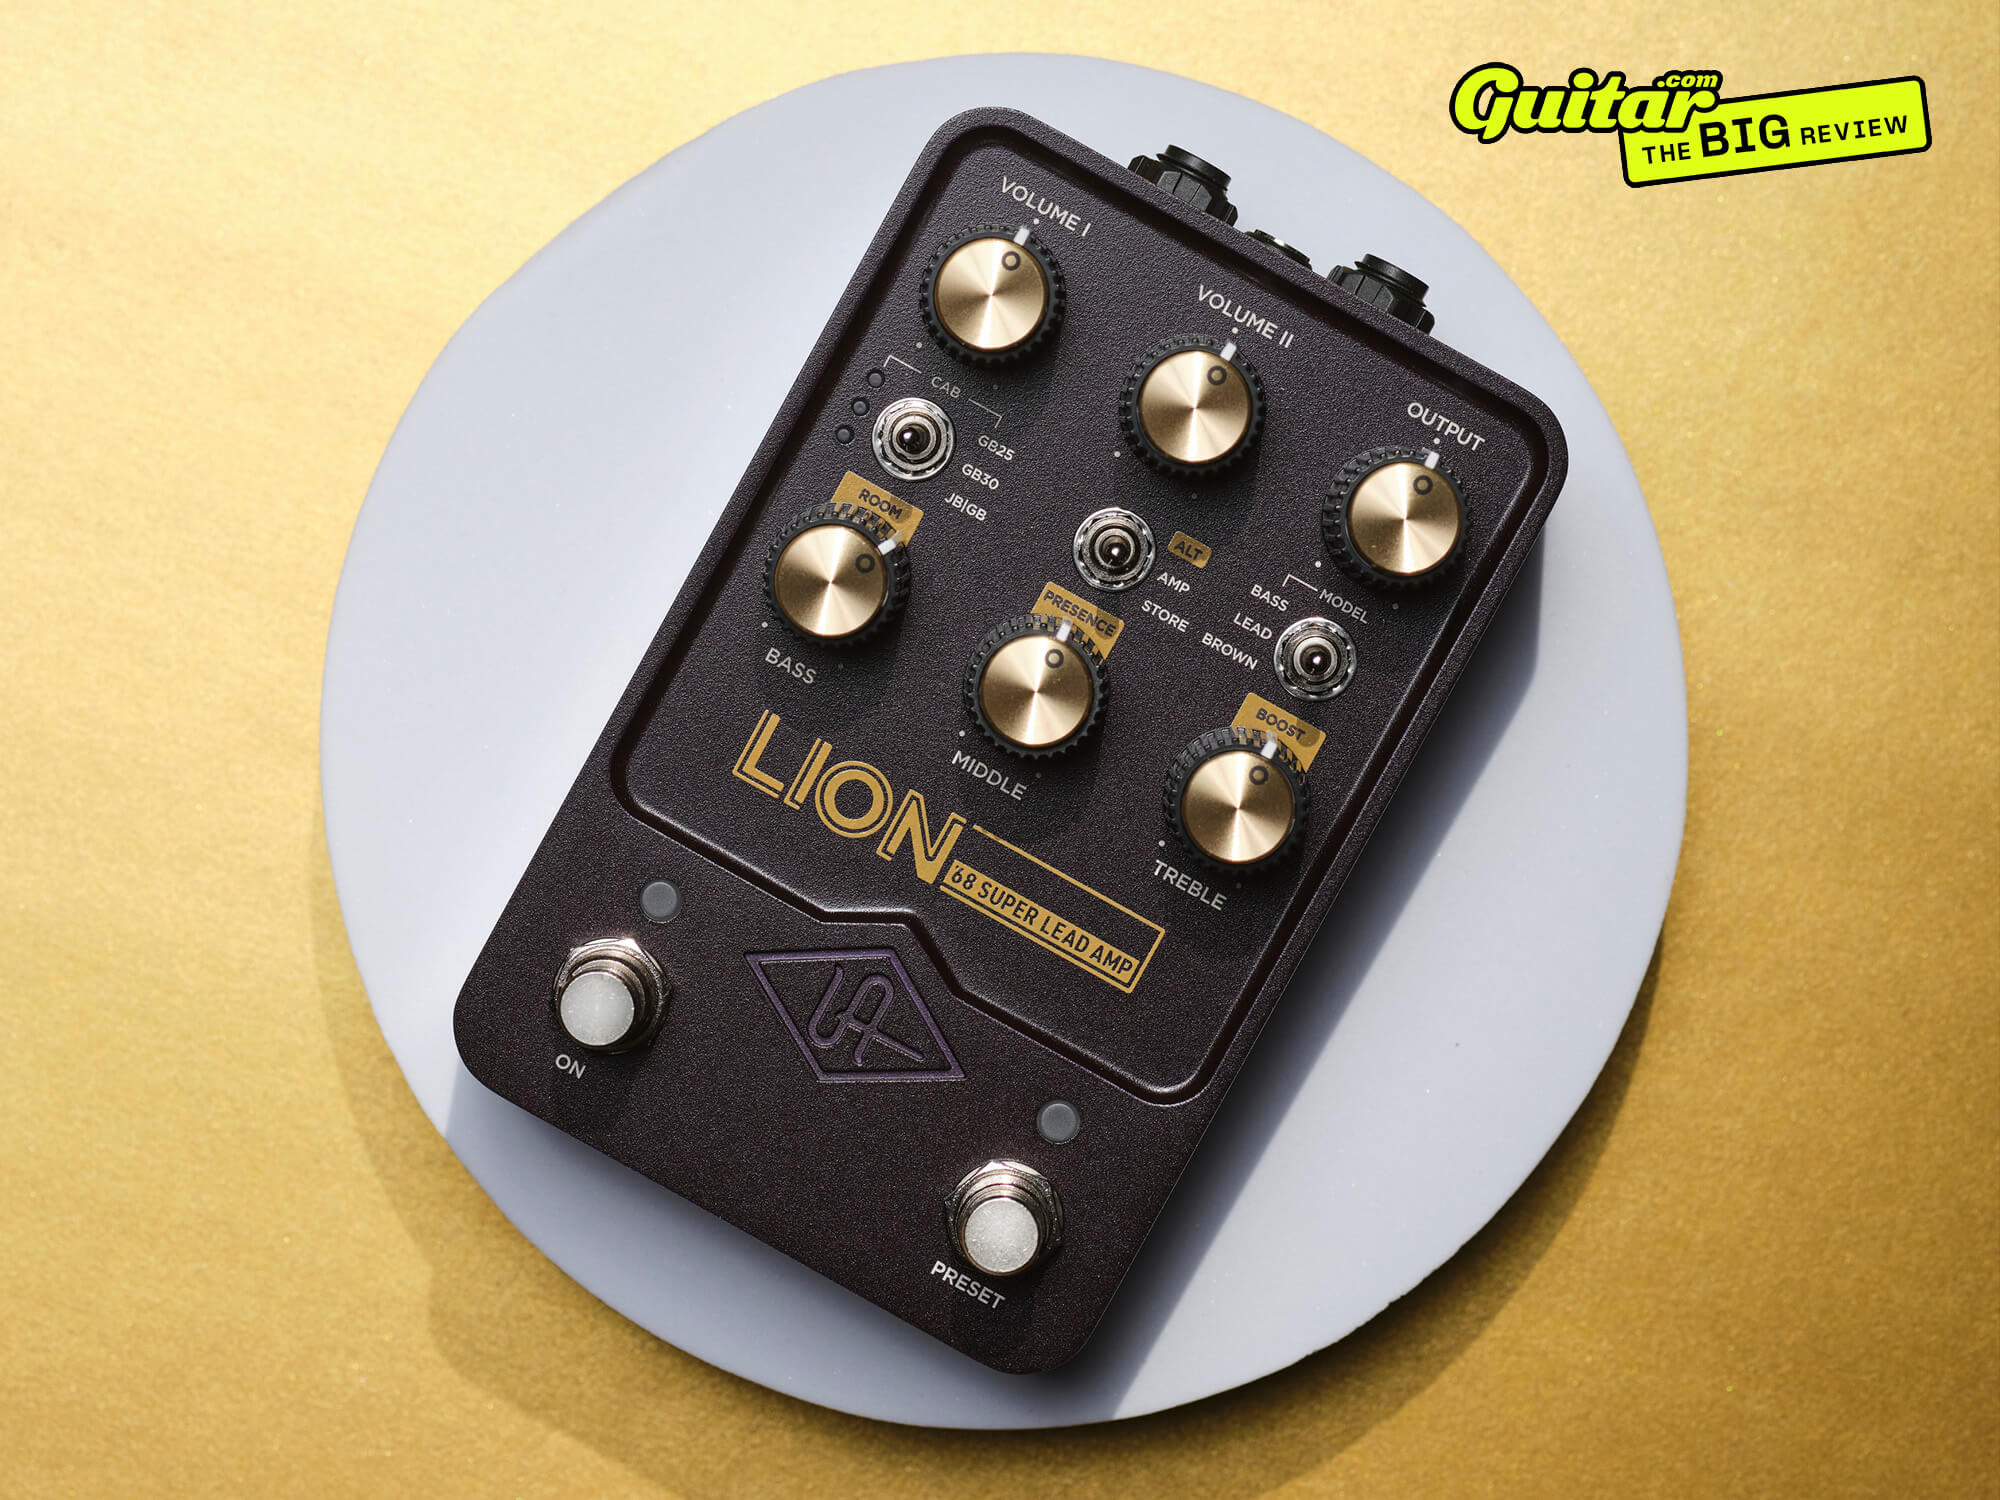 UAFX Lion review: UA's most raucous pedal yet delivers the goods